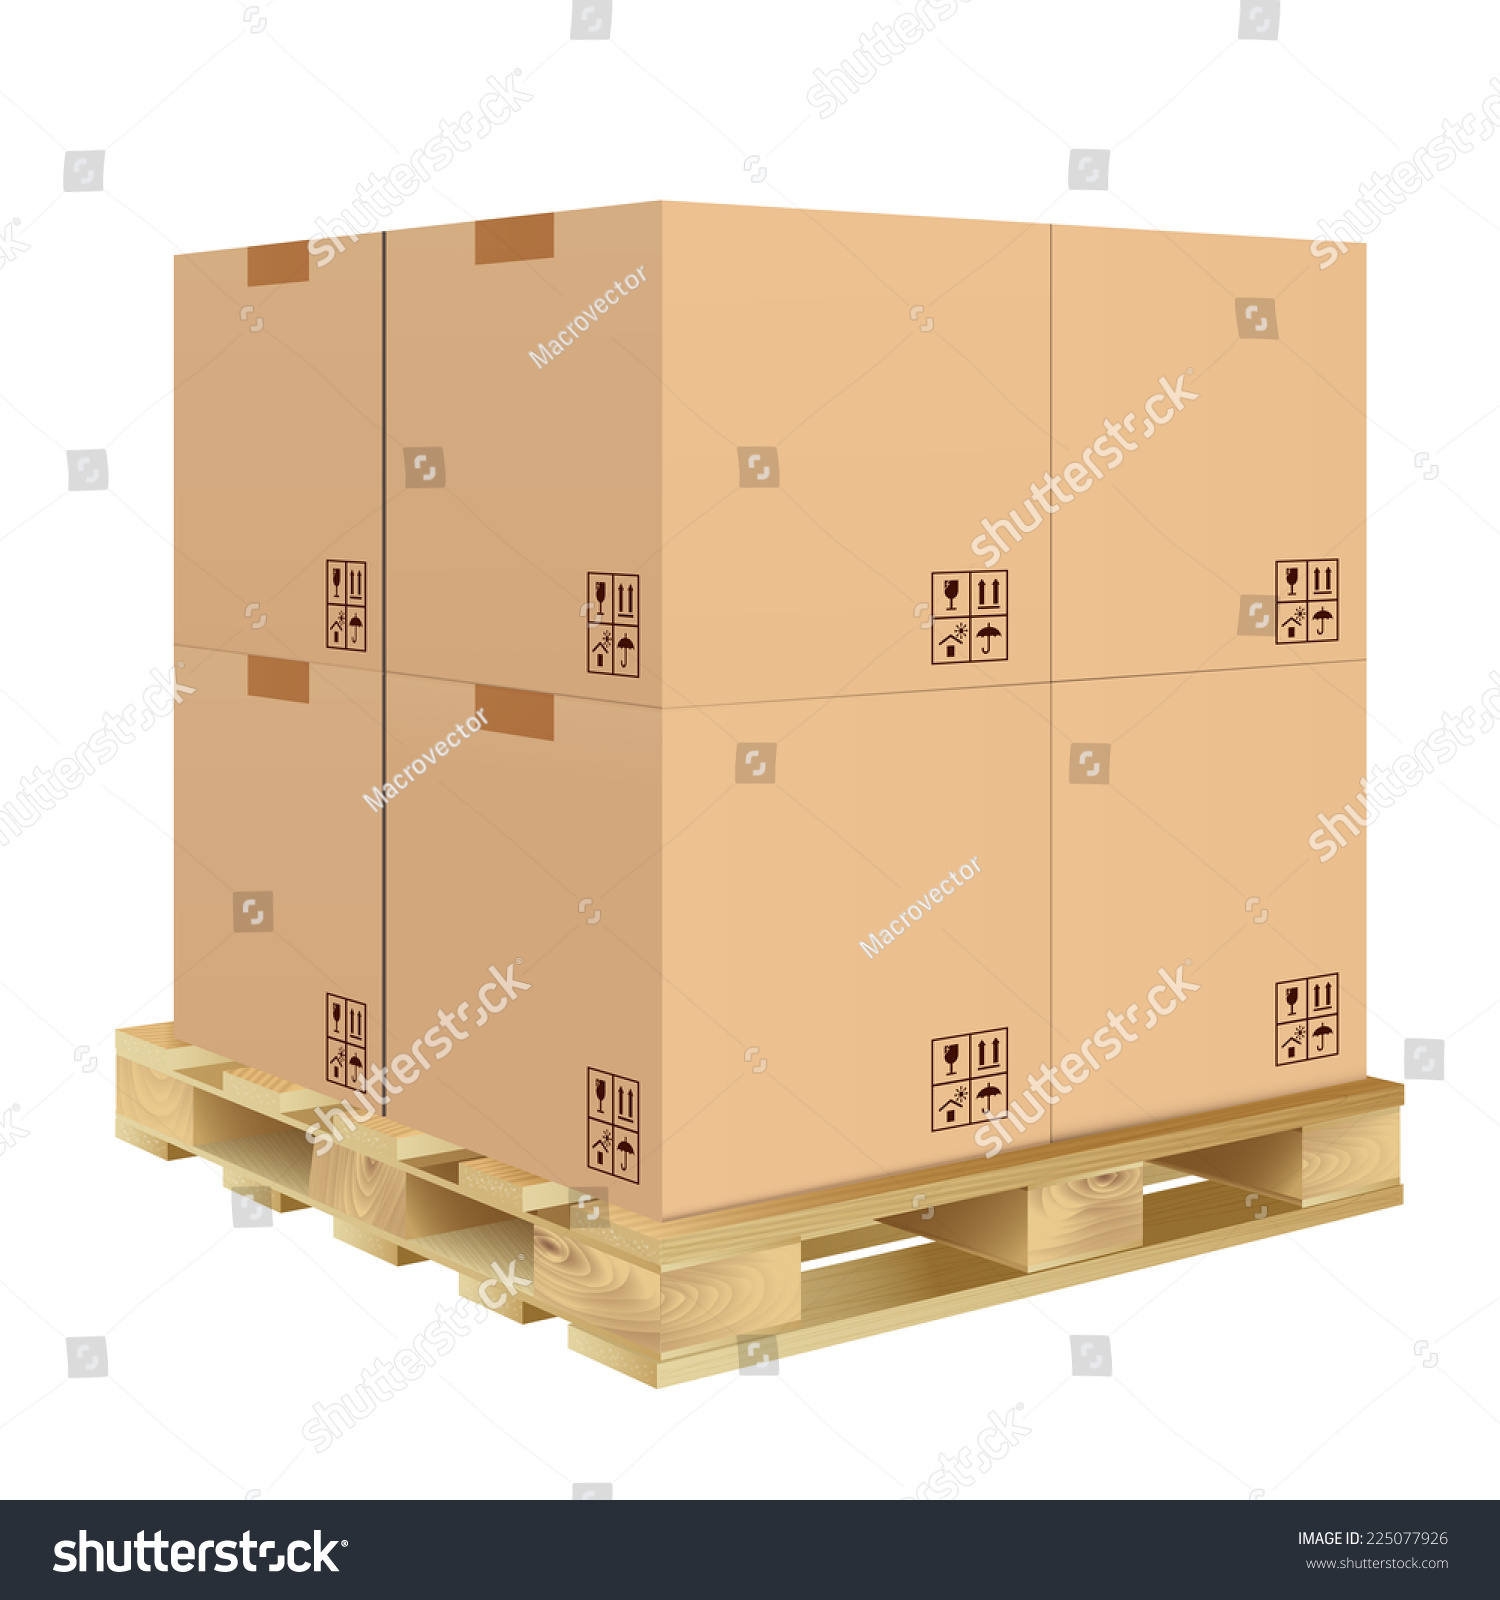 Brown closed carton delivery packaging box with fragile signs on wooden pallet isolated on white background vector illustration. #225077926